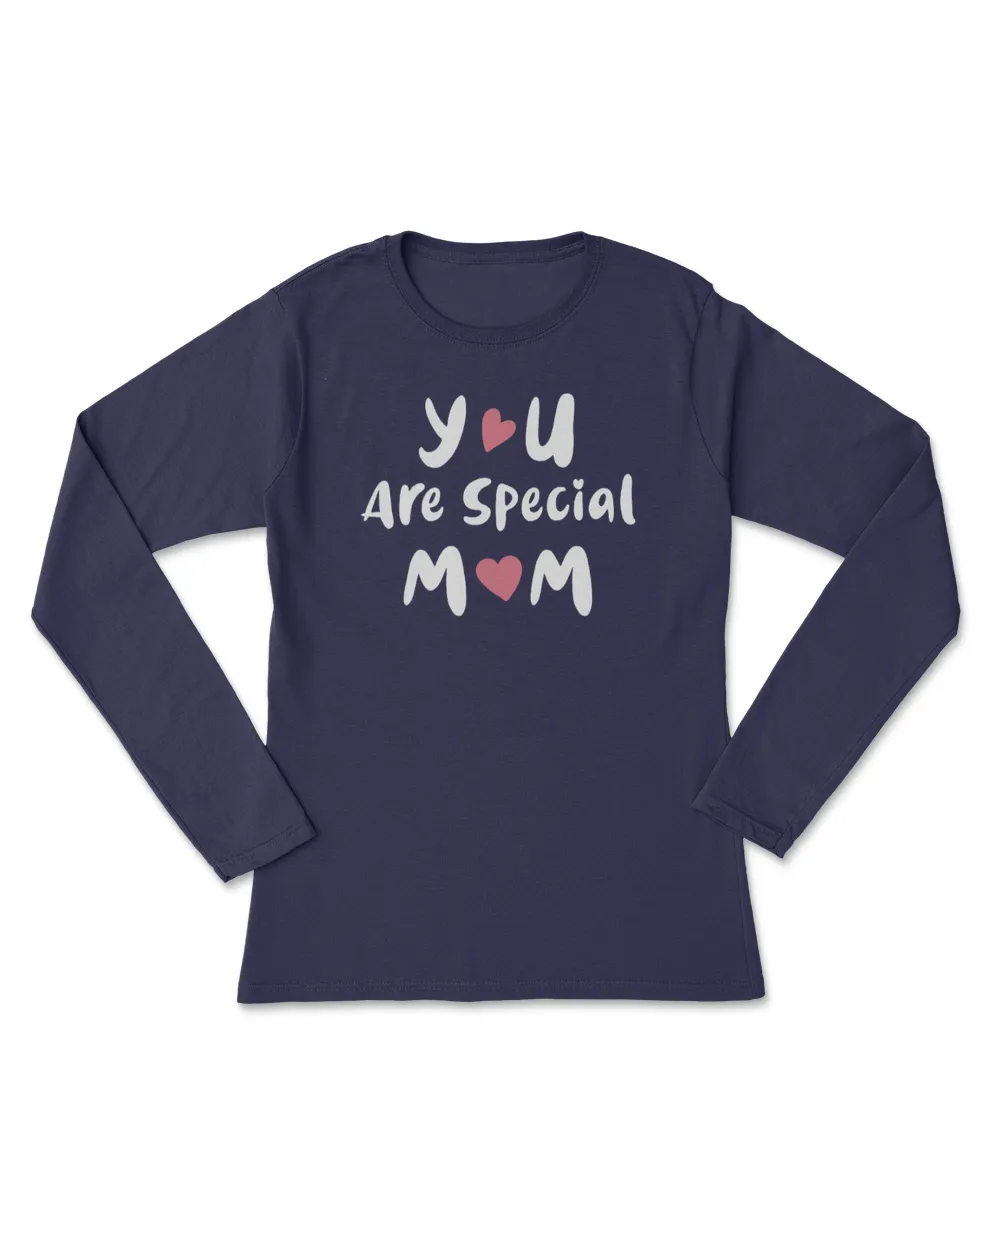 You are special mom t shirt